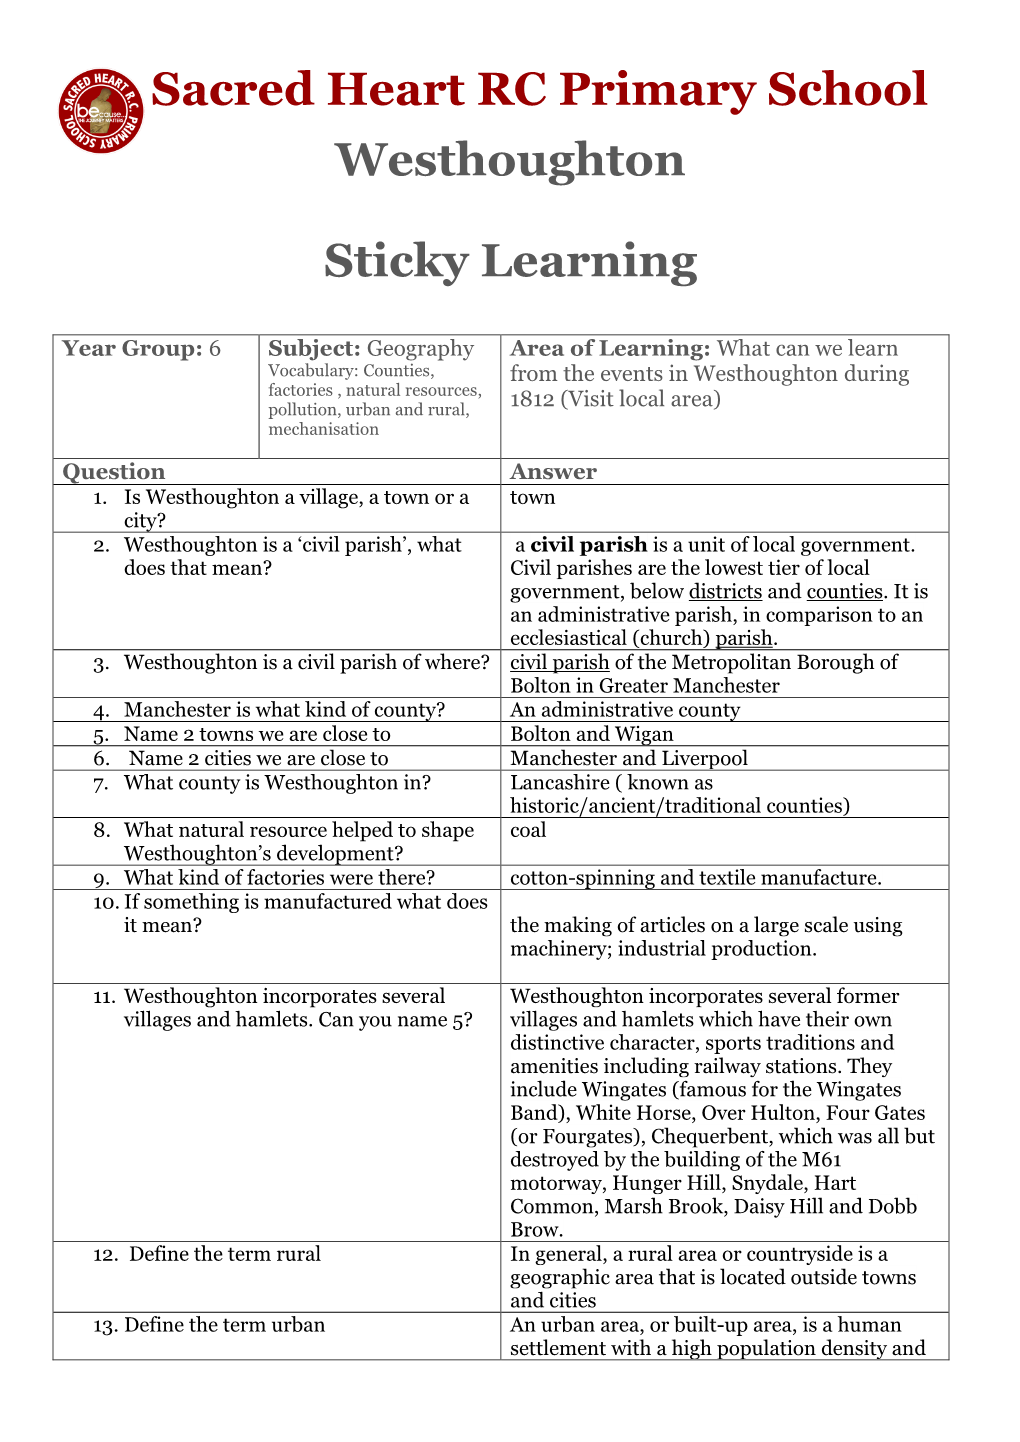 Sacred Heart RC Primary School Westhoughton Sticky Learning